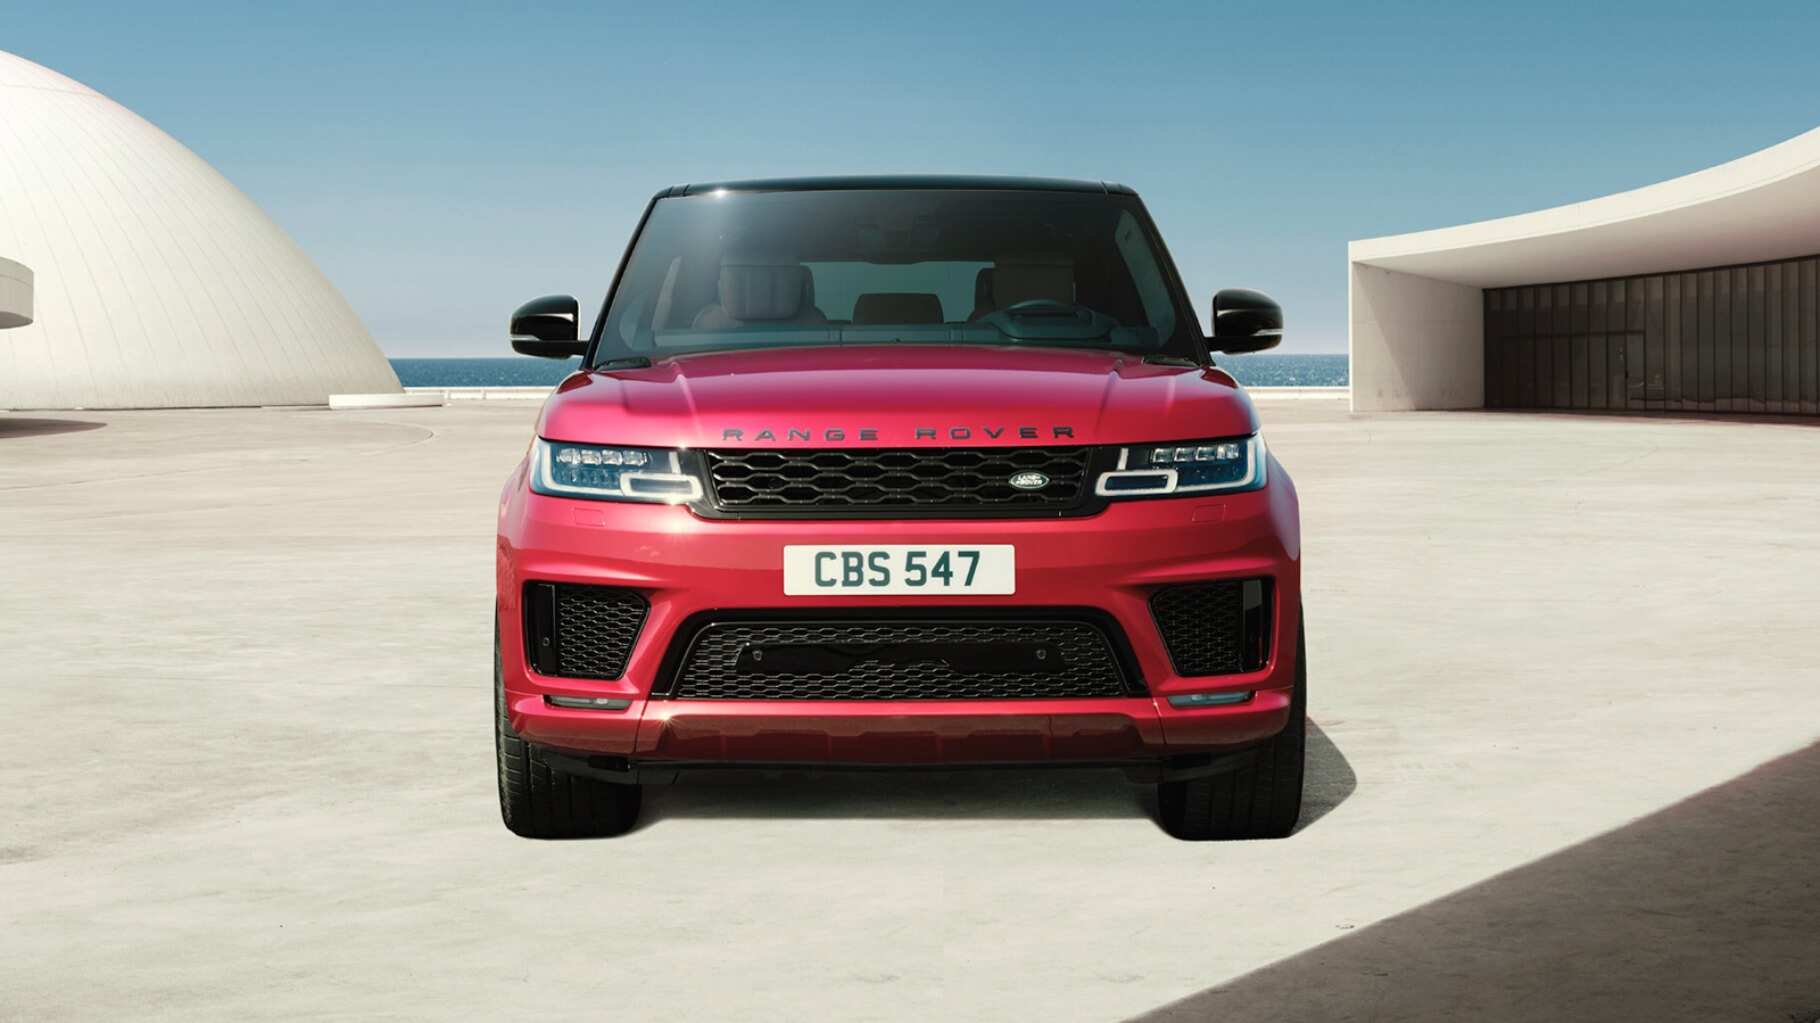 With sportier design cues and a powerful, muscular stance, Range Rover Sport is designed for impact.